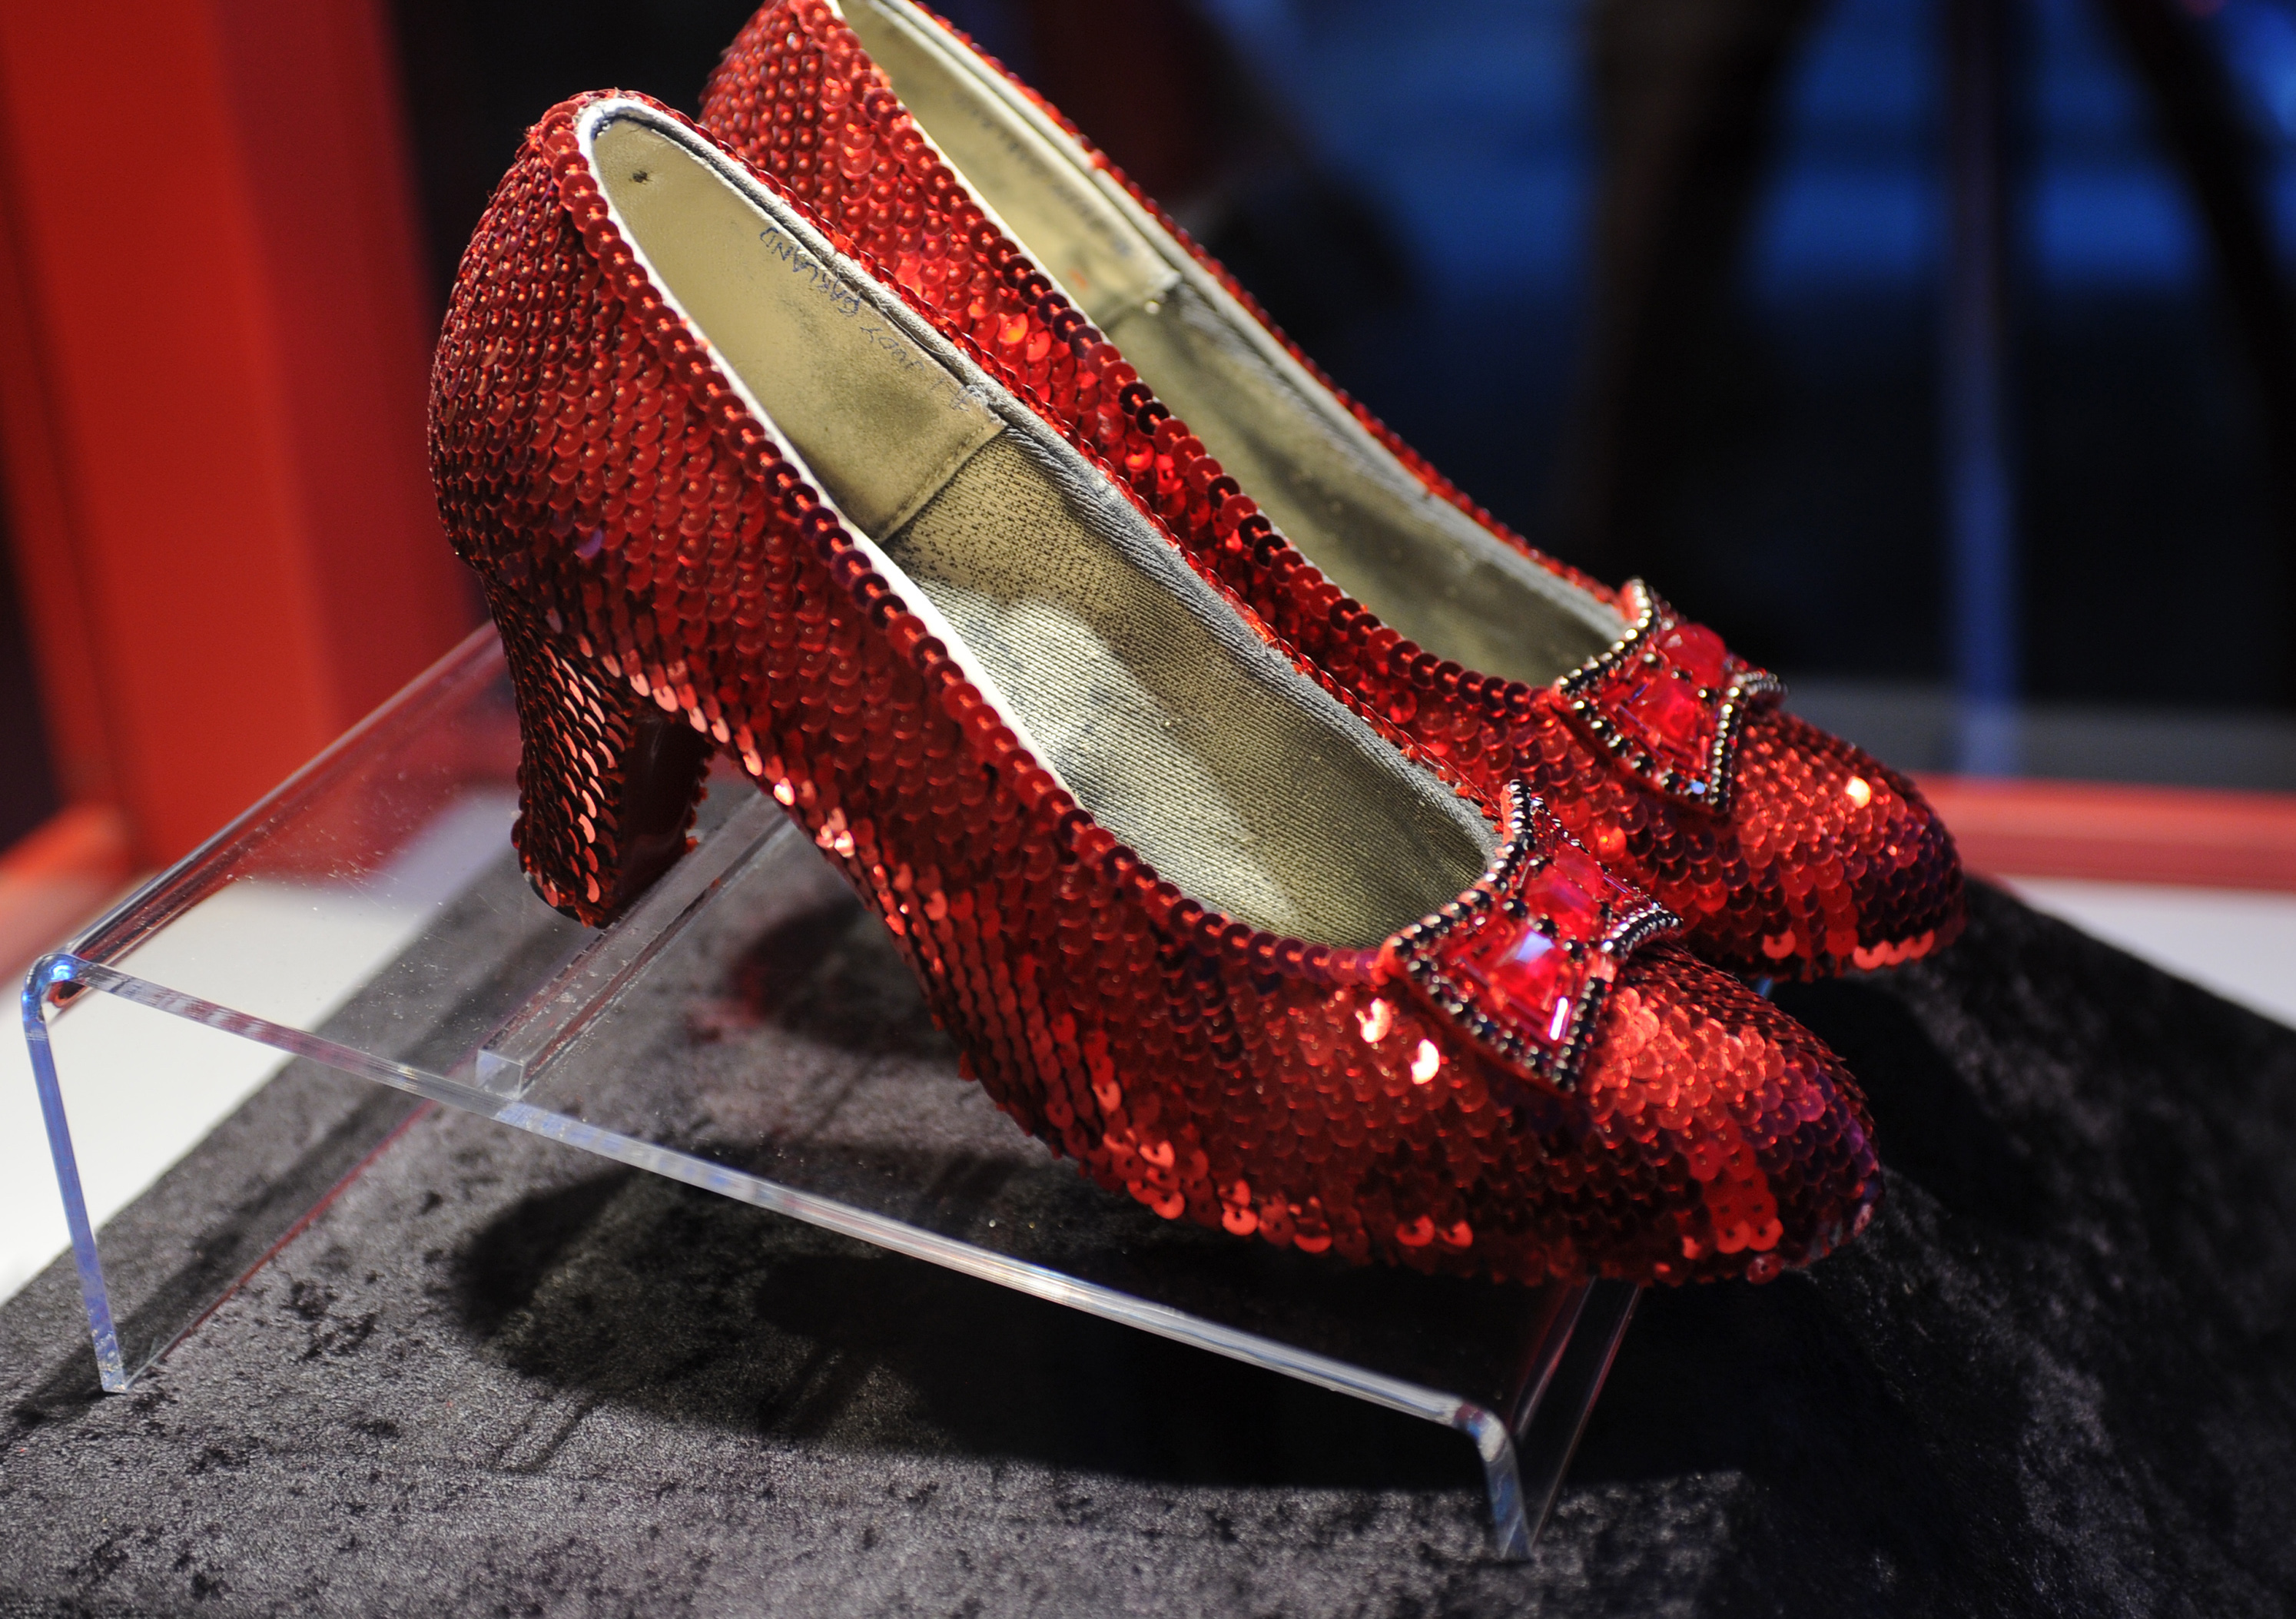 Missing Pair Of Dorothy's Ruby Slippers From The Wizard Oz Found After Decade